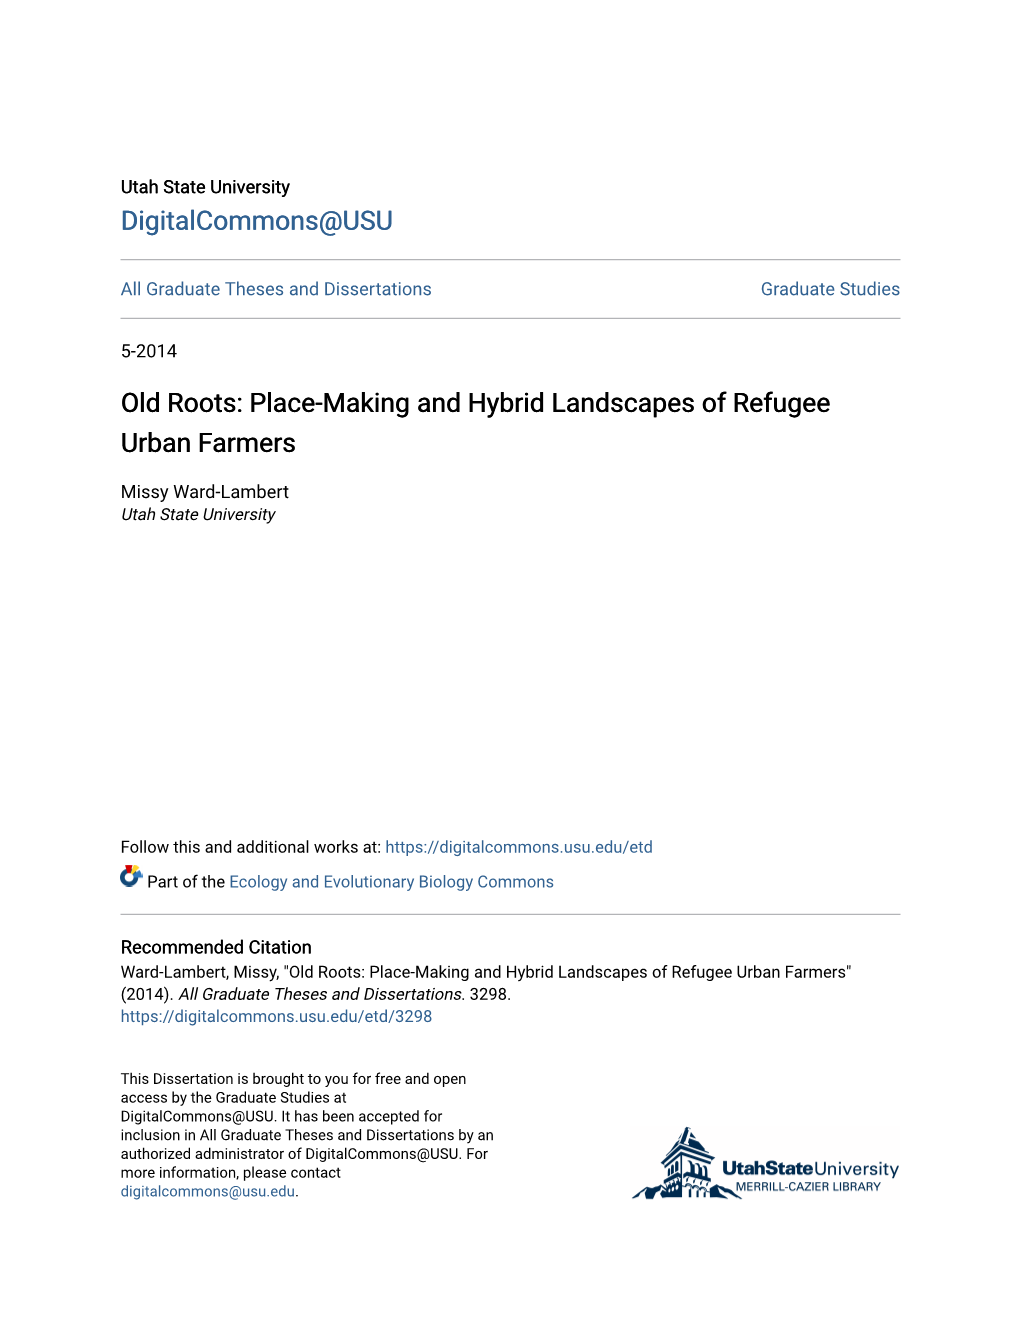 Place-Making and Hybrid Landscapes of Refugee Urban Farmers